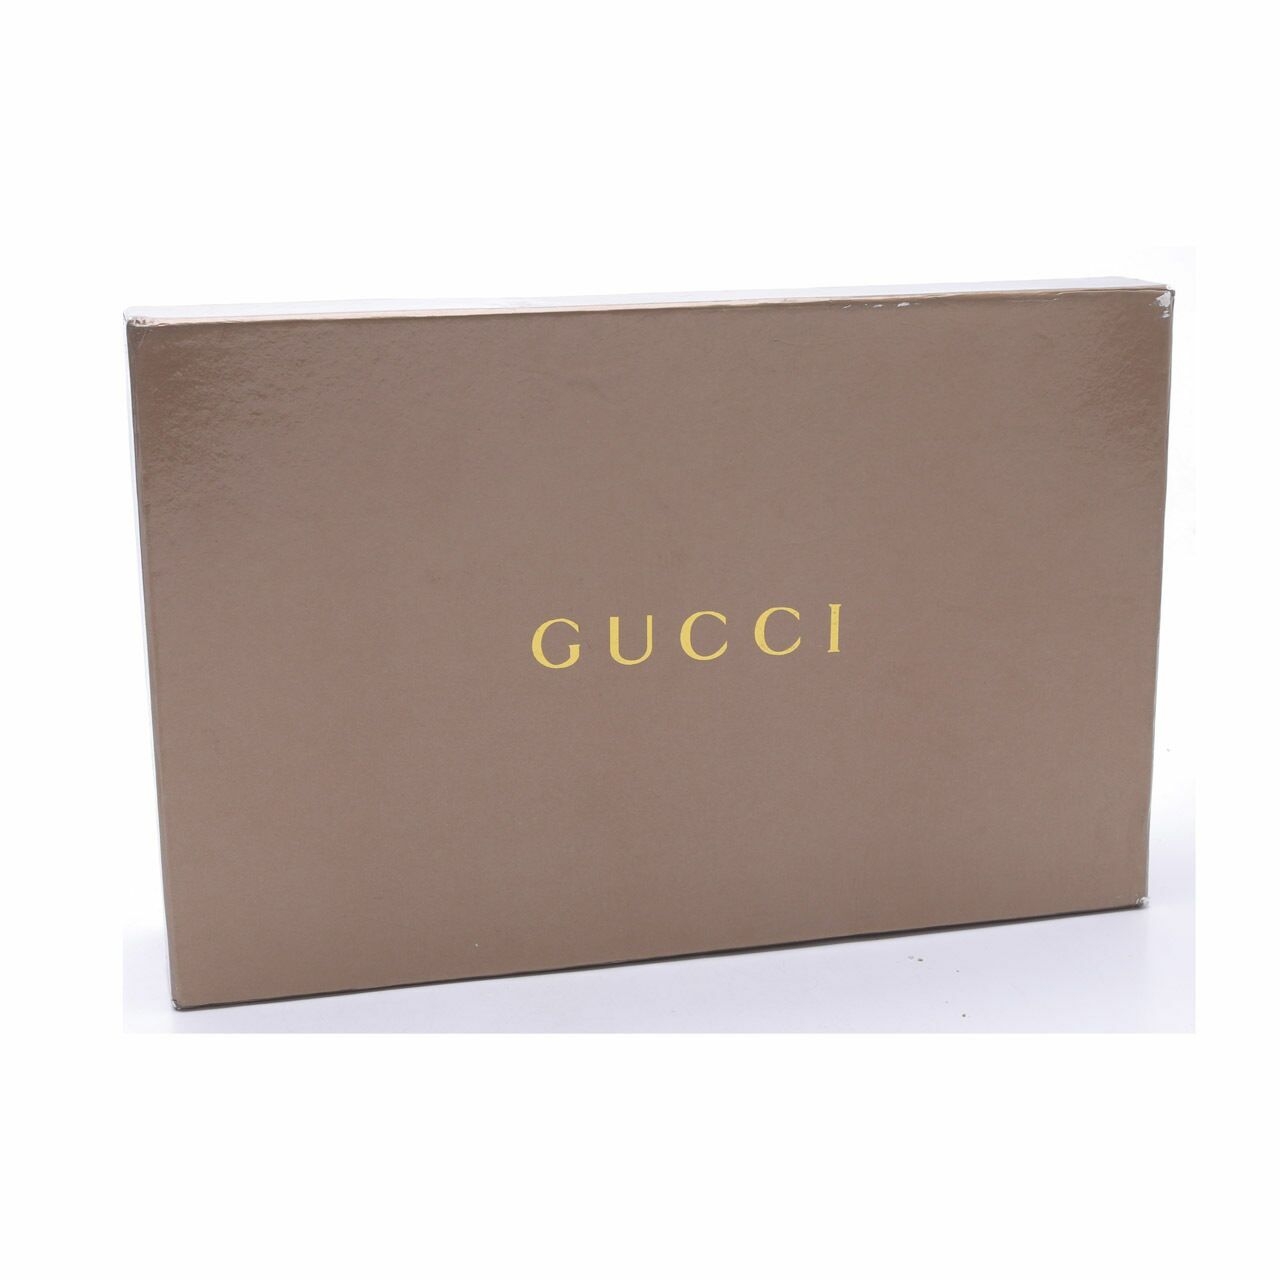 Gucci Red Guccissima Leather Signature Mini Wallet Chain Sling Bag